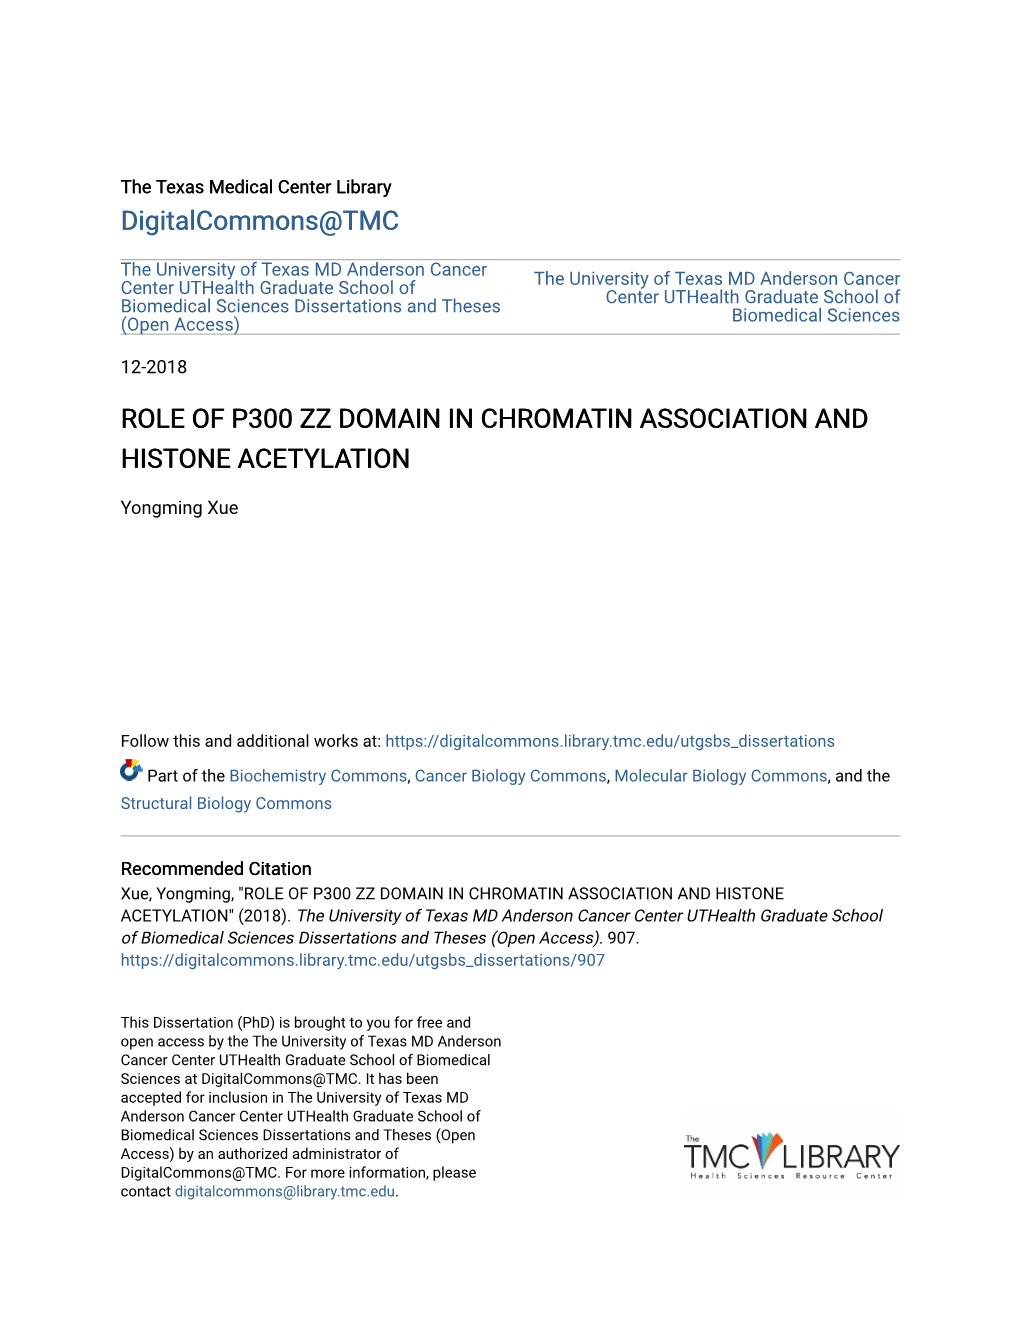 Role of P300 Zz Domain in Chromatin Association and Histone Acetylation